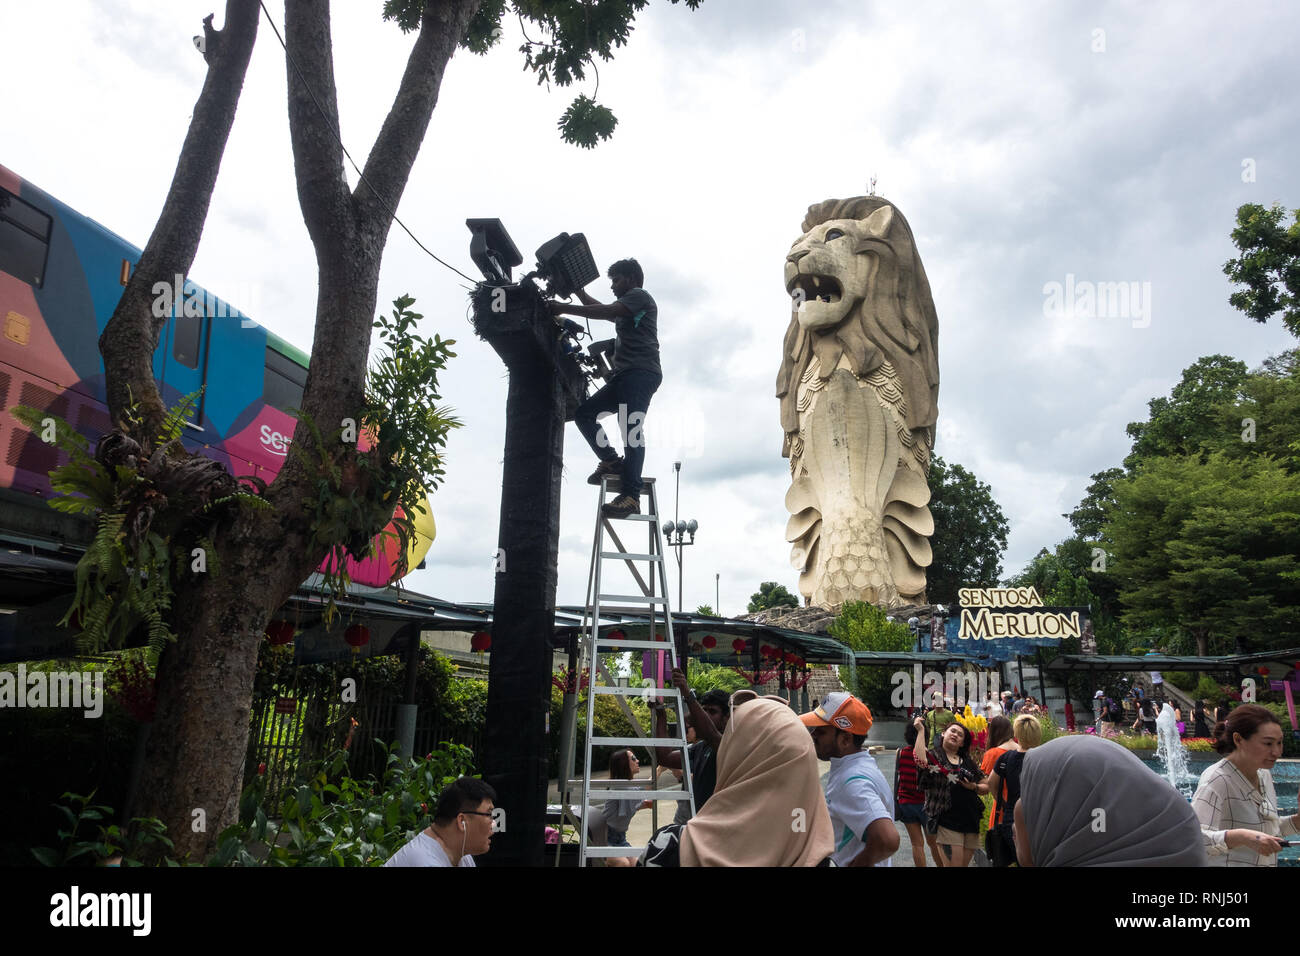 Singapore, Singapore - January 22, 2017: A worker repairs lighting on a ladder, with iconic merlion statue and tourists in the distance, Sentosa Islan Stock Photo